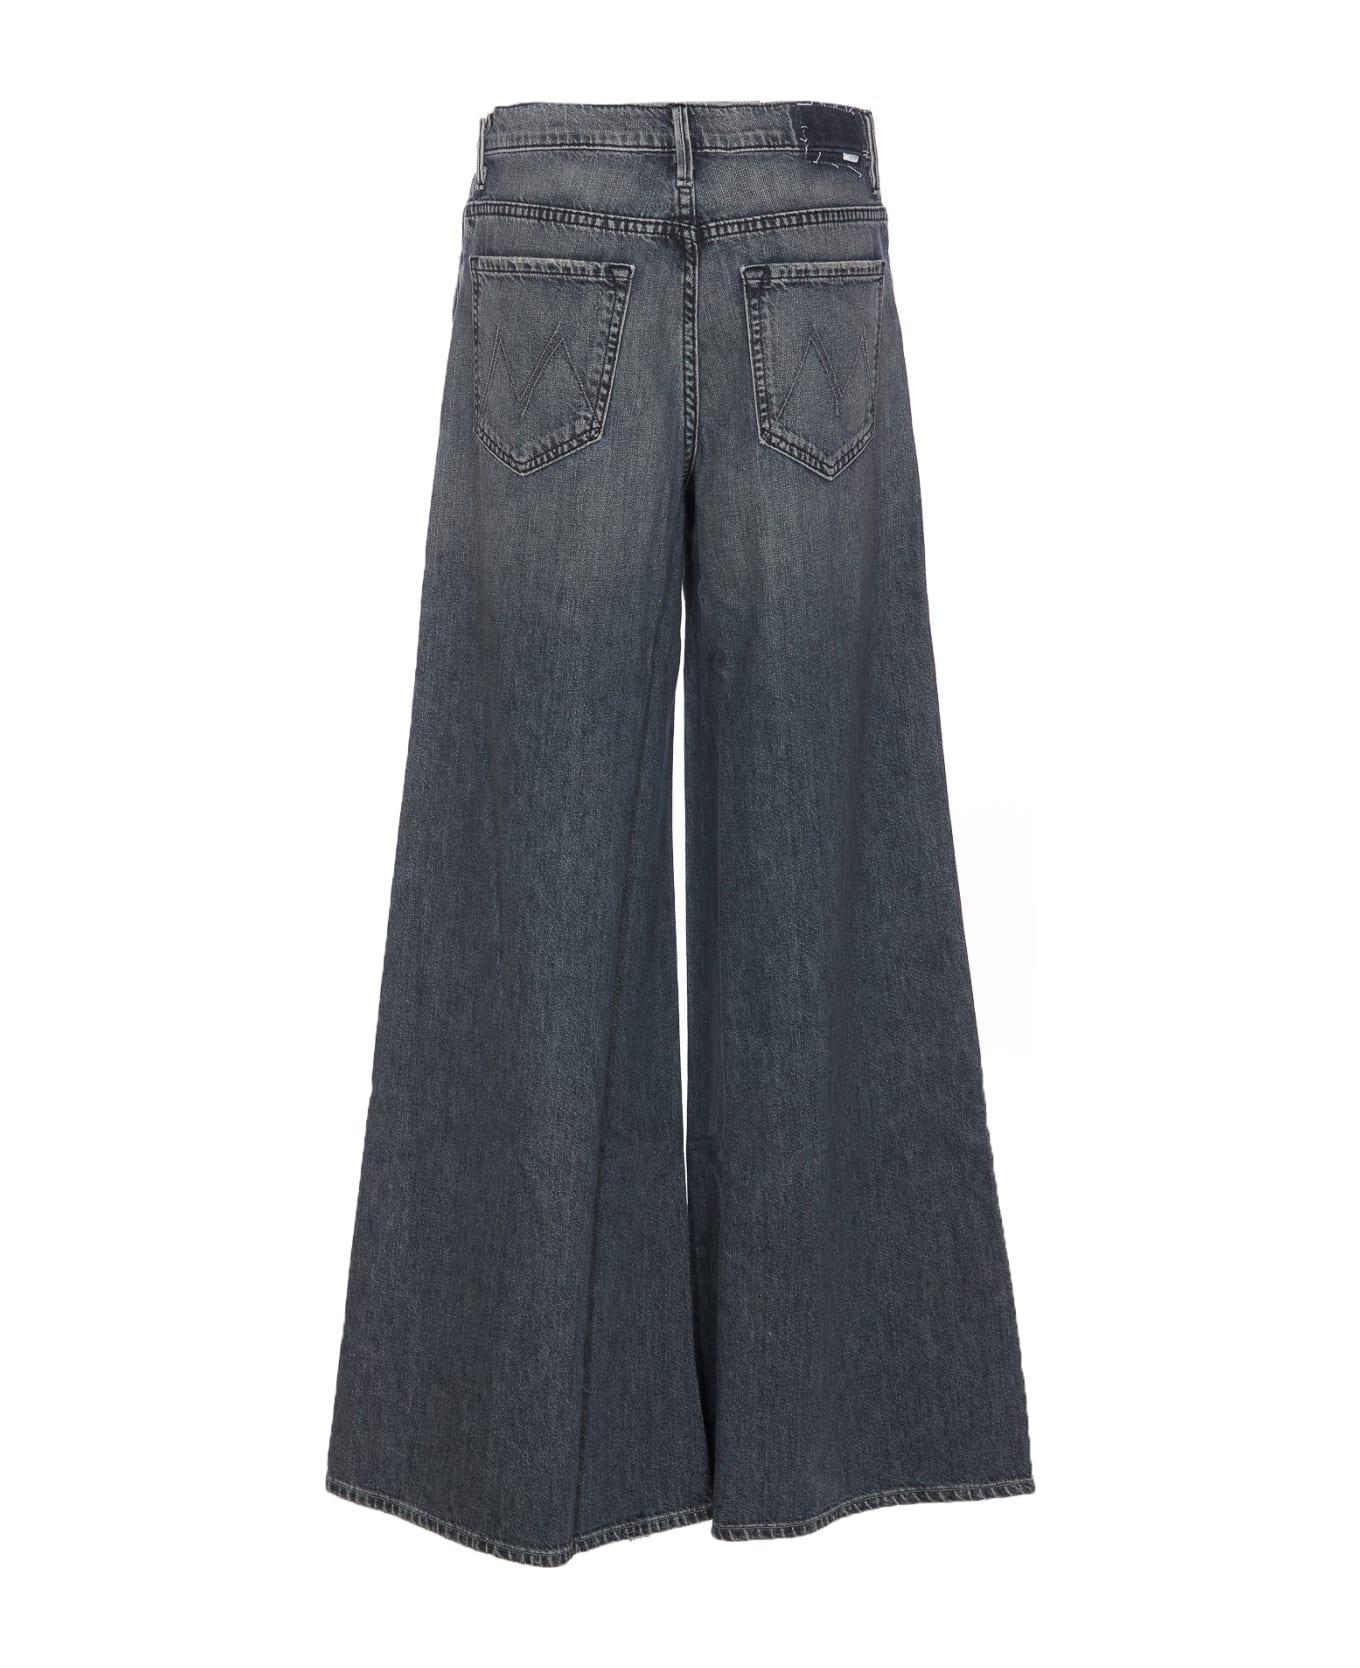 Mother The Swisher Jeans - Black デニム